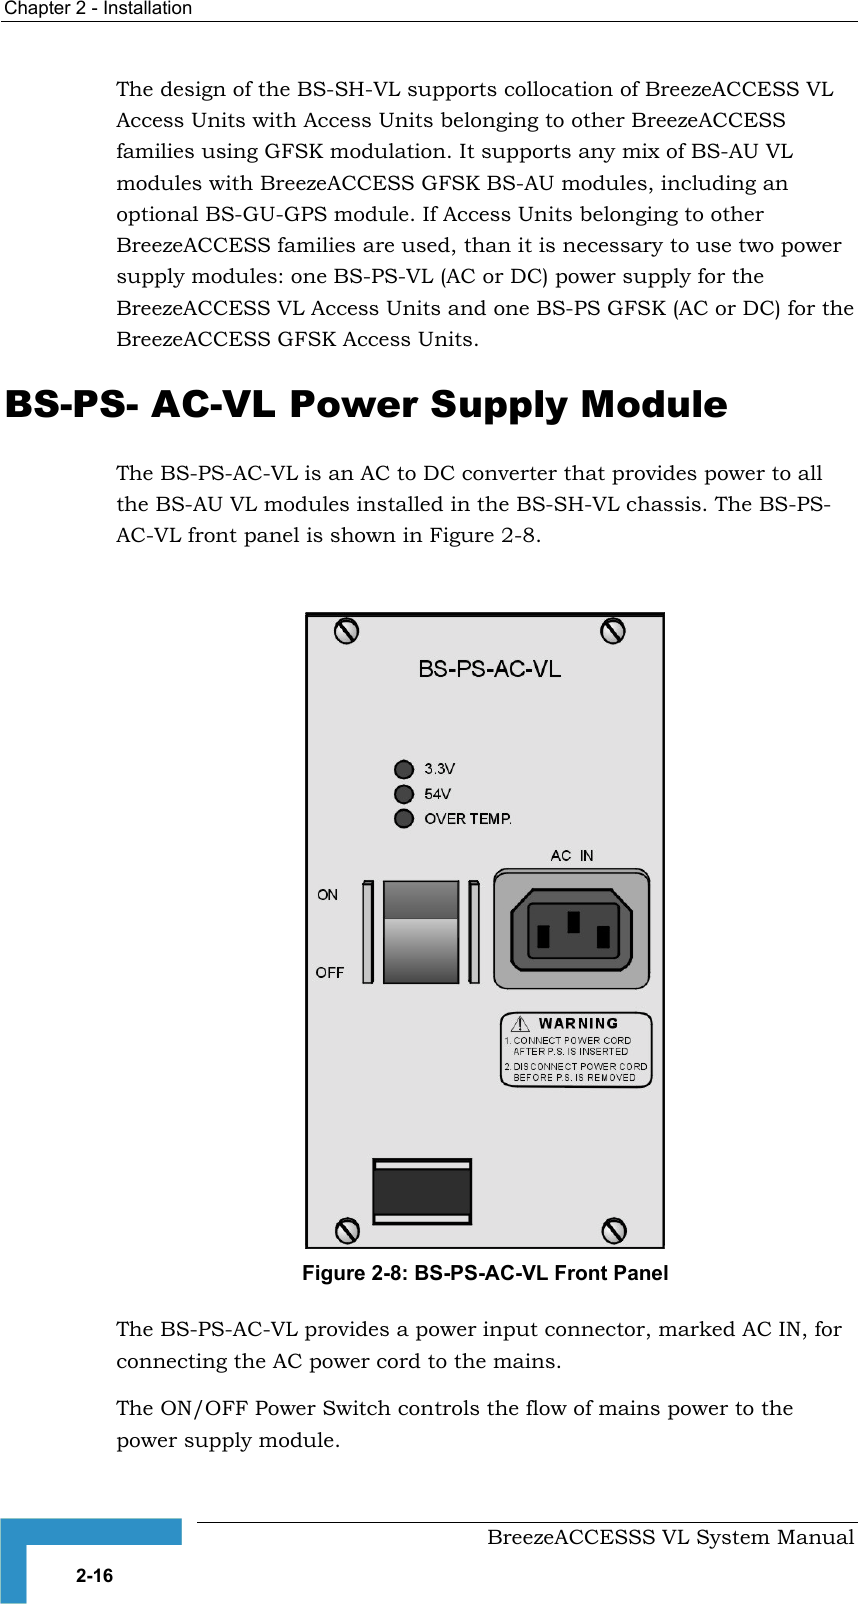 Chapter  2 - Installation     BreezeACCESSS VL System Manual 2-16 The design of the BS-SH-VL supports collocation of BreezeACCESS VL Access Units with Access Units belonging to other BreezeACCESS families using GFSK modulation. It supports any mix of BS-AU VL modules with BreezeACCESS GFSK BS-AU modules, including an optional BS-GU-GPS module. If Access Units belonging to other BreezeACCESS families are used, than it is necessary to use two power supply modules: one BS-PS-VL (AC or DC) power supply for the BreezeACCESS VL Access Units and one BS-PS GFSK (AC or DC) for the BreezeACCESS GFSK Access Units.     BS-PS- AC-VL Power Supply Module The BS-PS-AC-VL is an AC to DC converter that provides power to all the BS-AU VL modules installed in the BS-SH-VL chassis. The BS-PS-AC-VL front panel is shown in Figure  2-8.   Figure  2-8: BS-PS-AC-VL Front Panel The BS-PS-AC-VL provides a power input connector, marked AC IN, for connecting the AC power cord to the mains. The ON/OFF Power Switch controls the flow of mains power to the power supply module. 